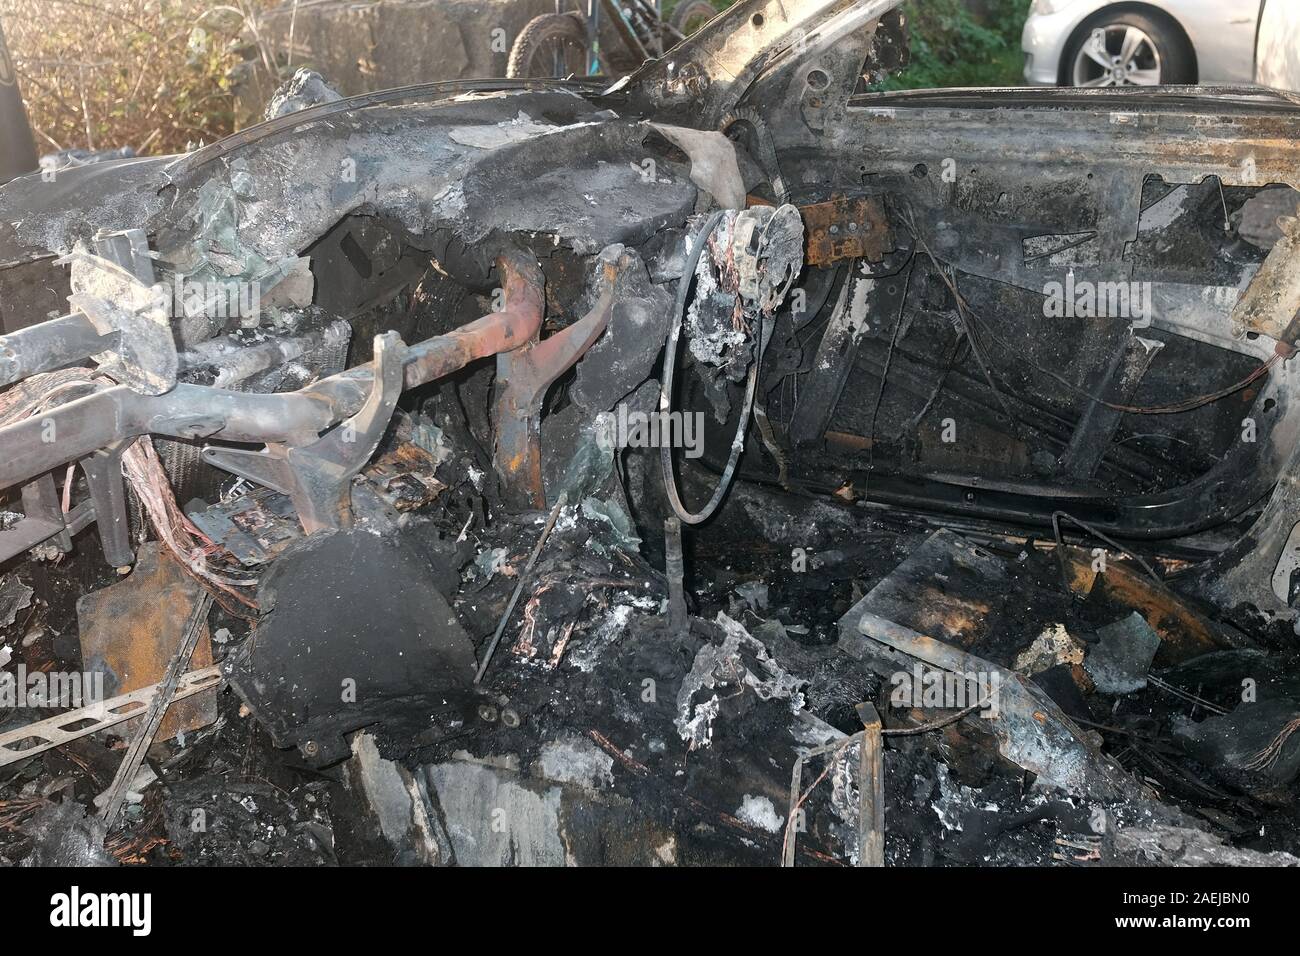 December 2019 - Burnt out stolen BMW estate car which had been deliberately set on fire to destroy evidence. Stock Photo